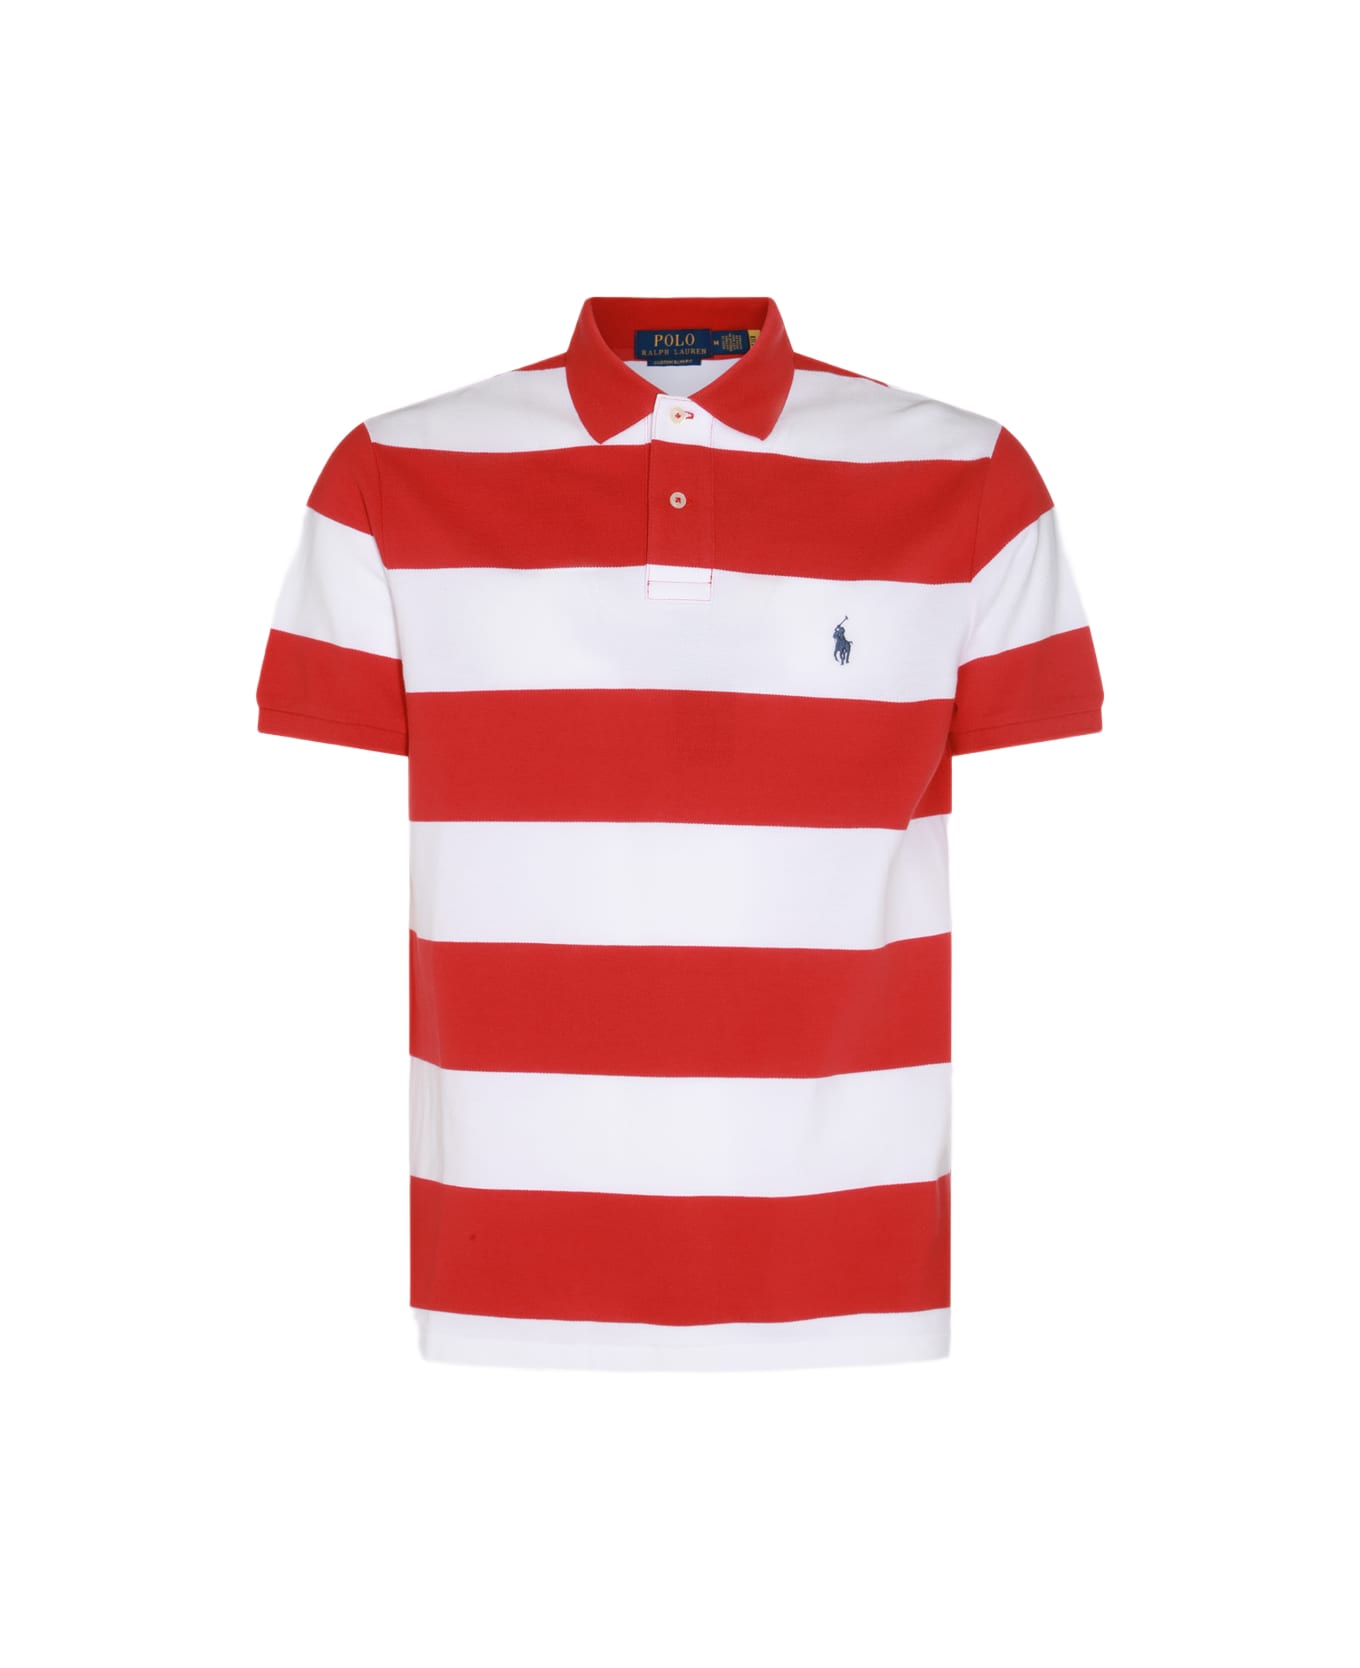 Polo Ralph Lauren Red And White Cotton Polo Shirt - POST RED/WHITE